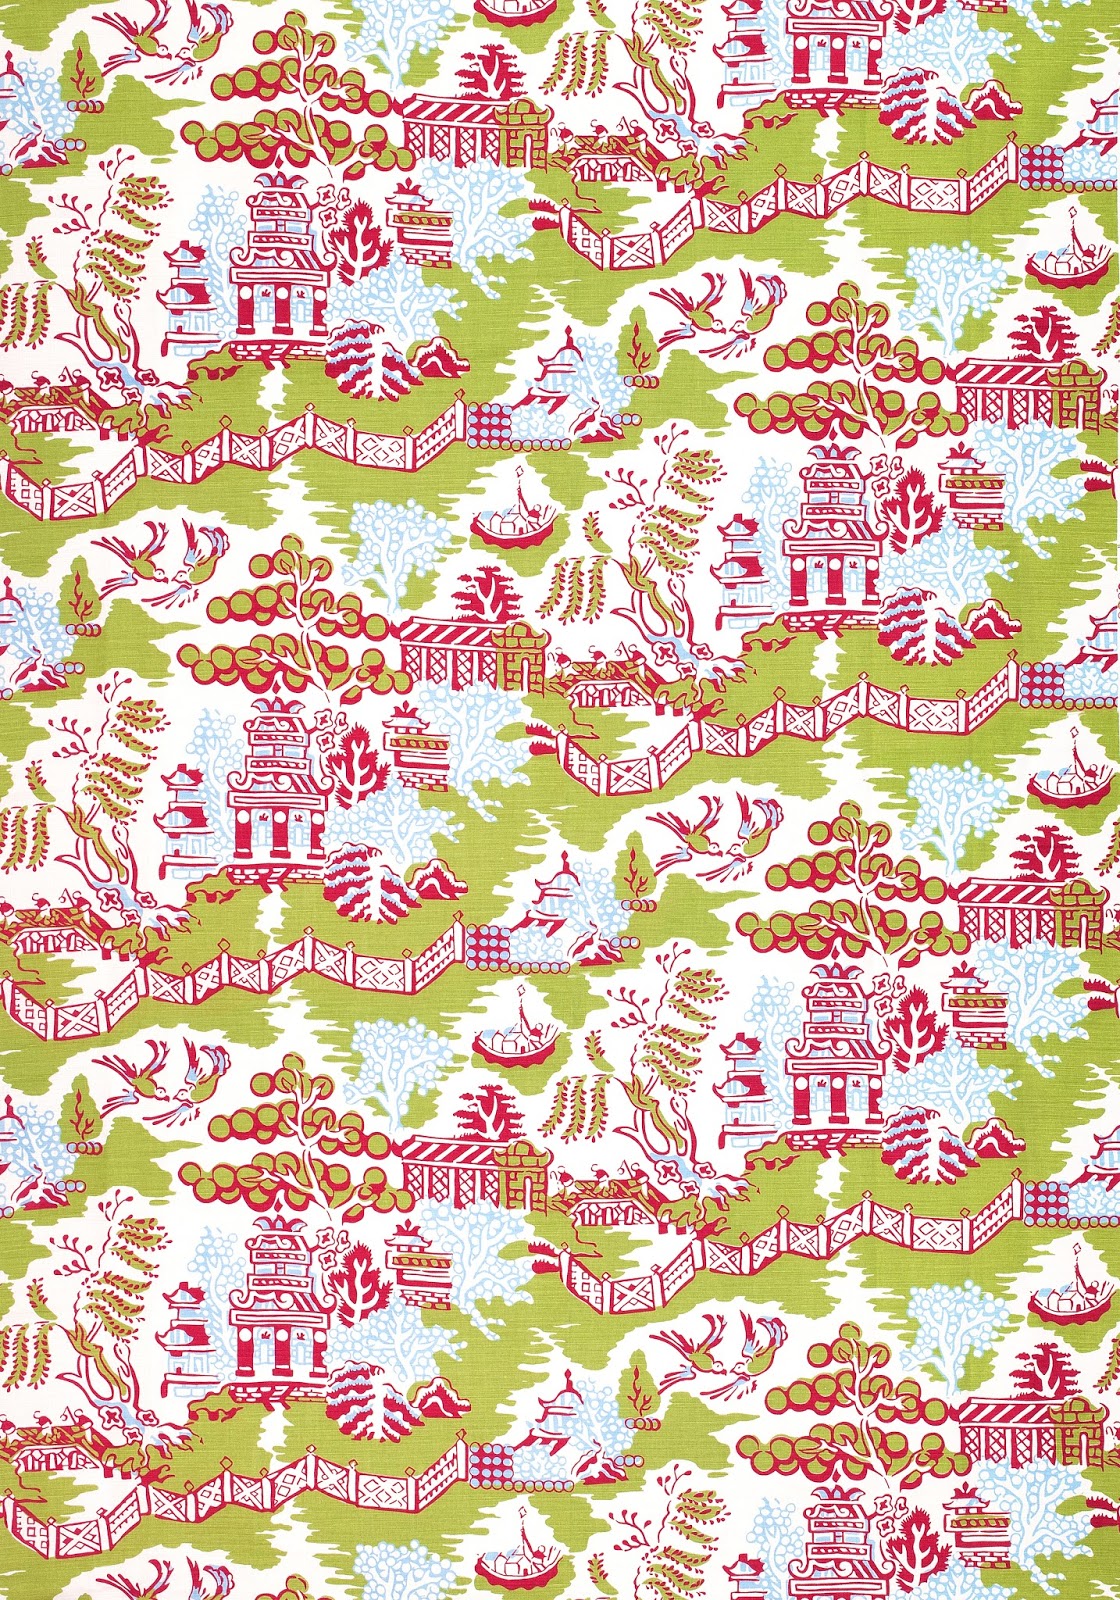 It Is Also Available In Fabric I Love This Green And Raspberry